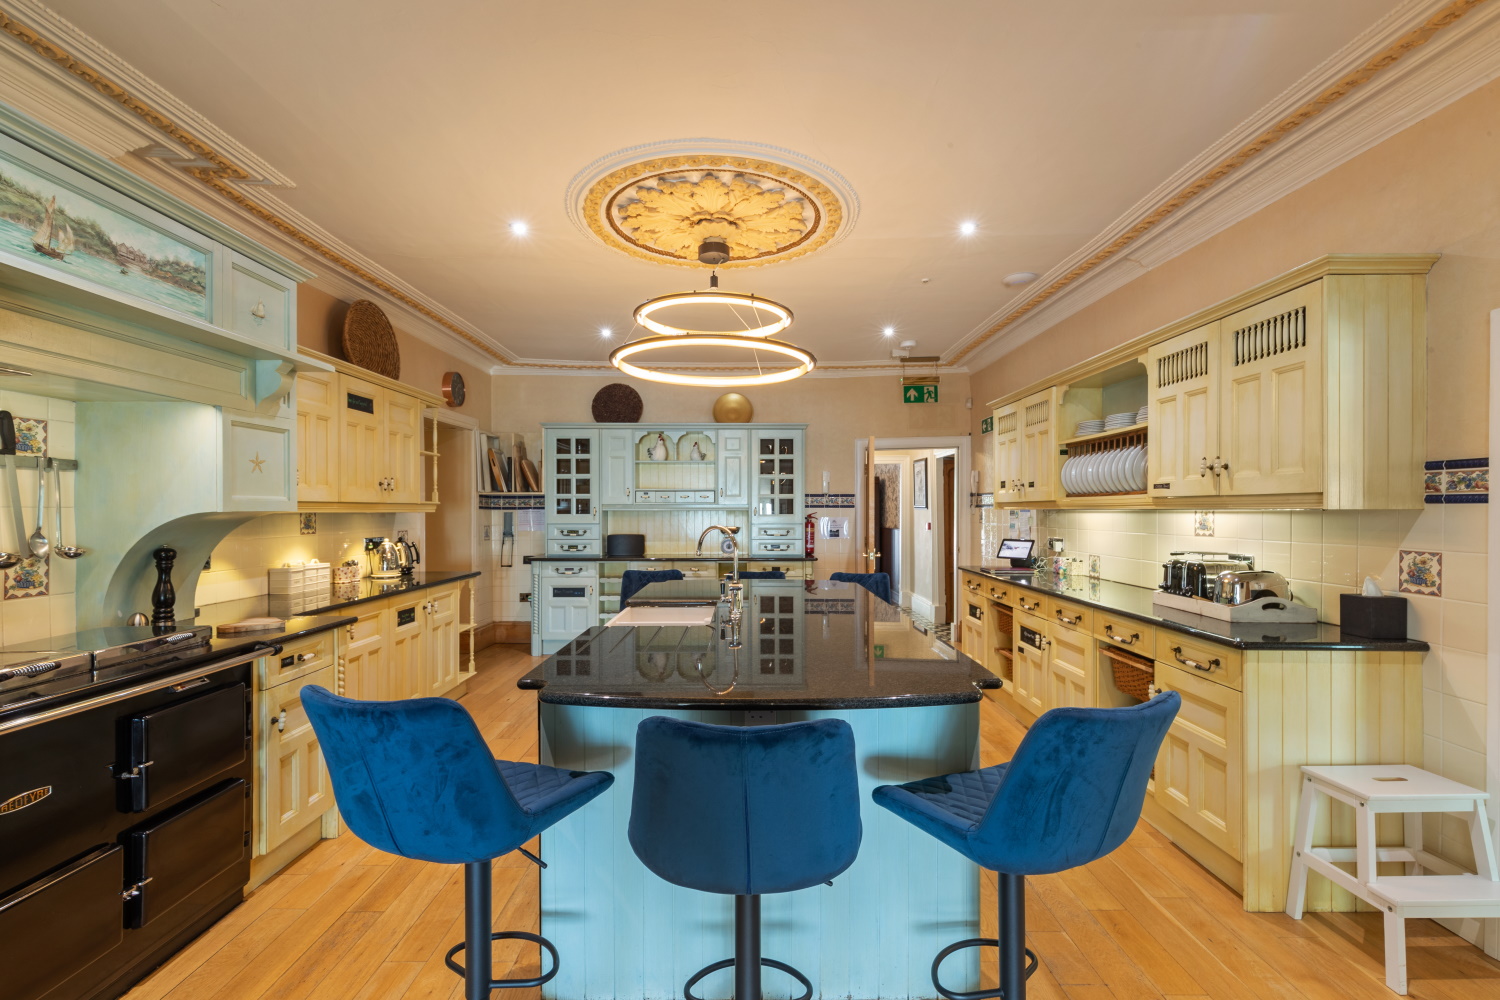 Waterwynch - stunning luxury family kitchen with sociable island seating